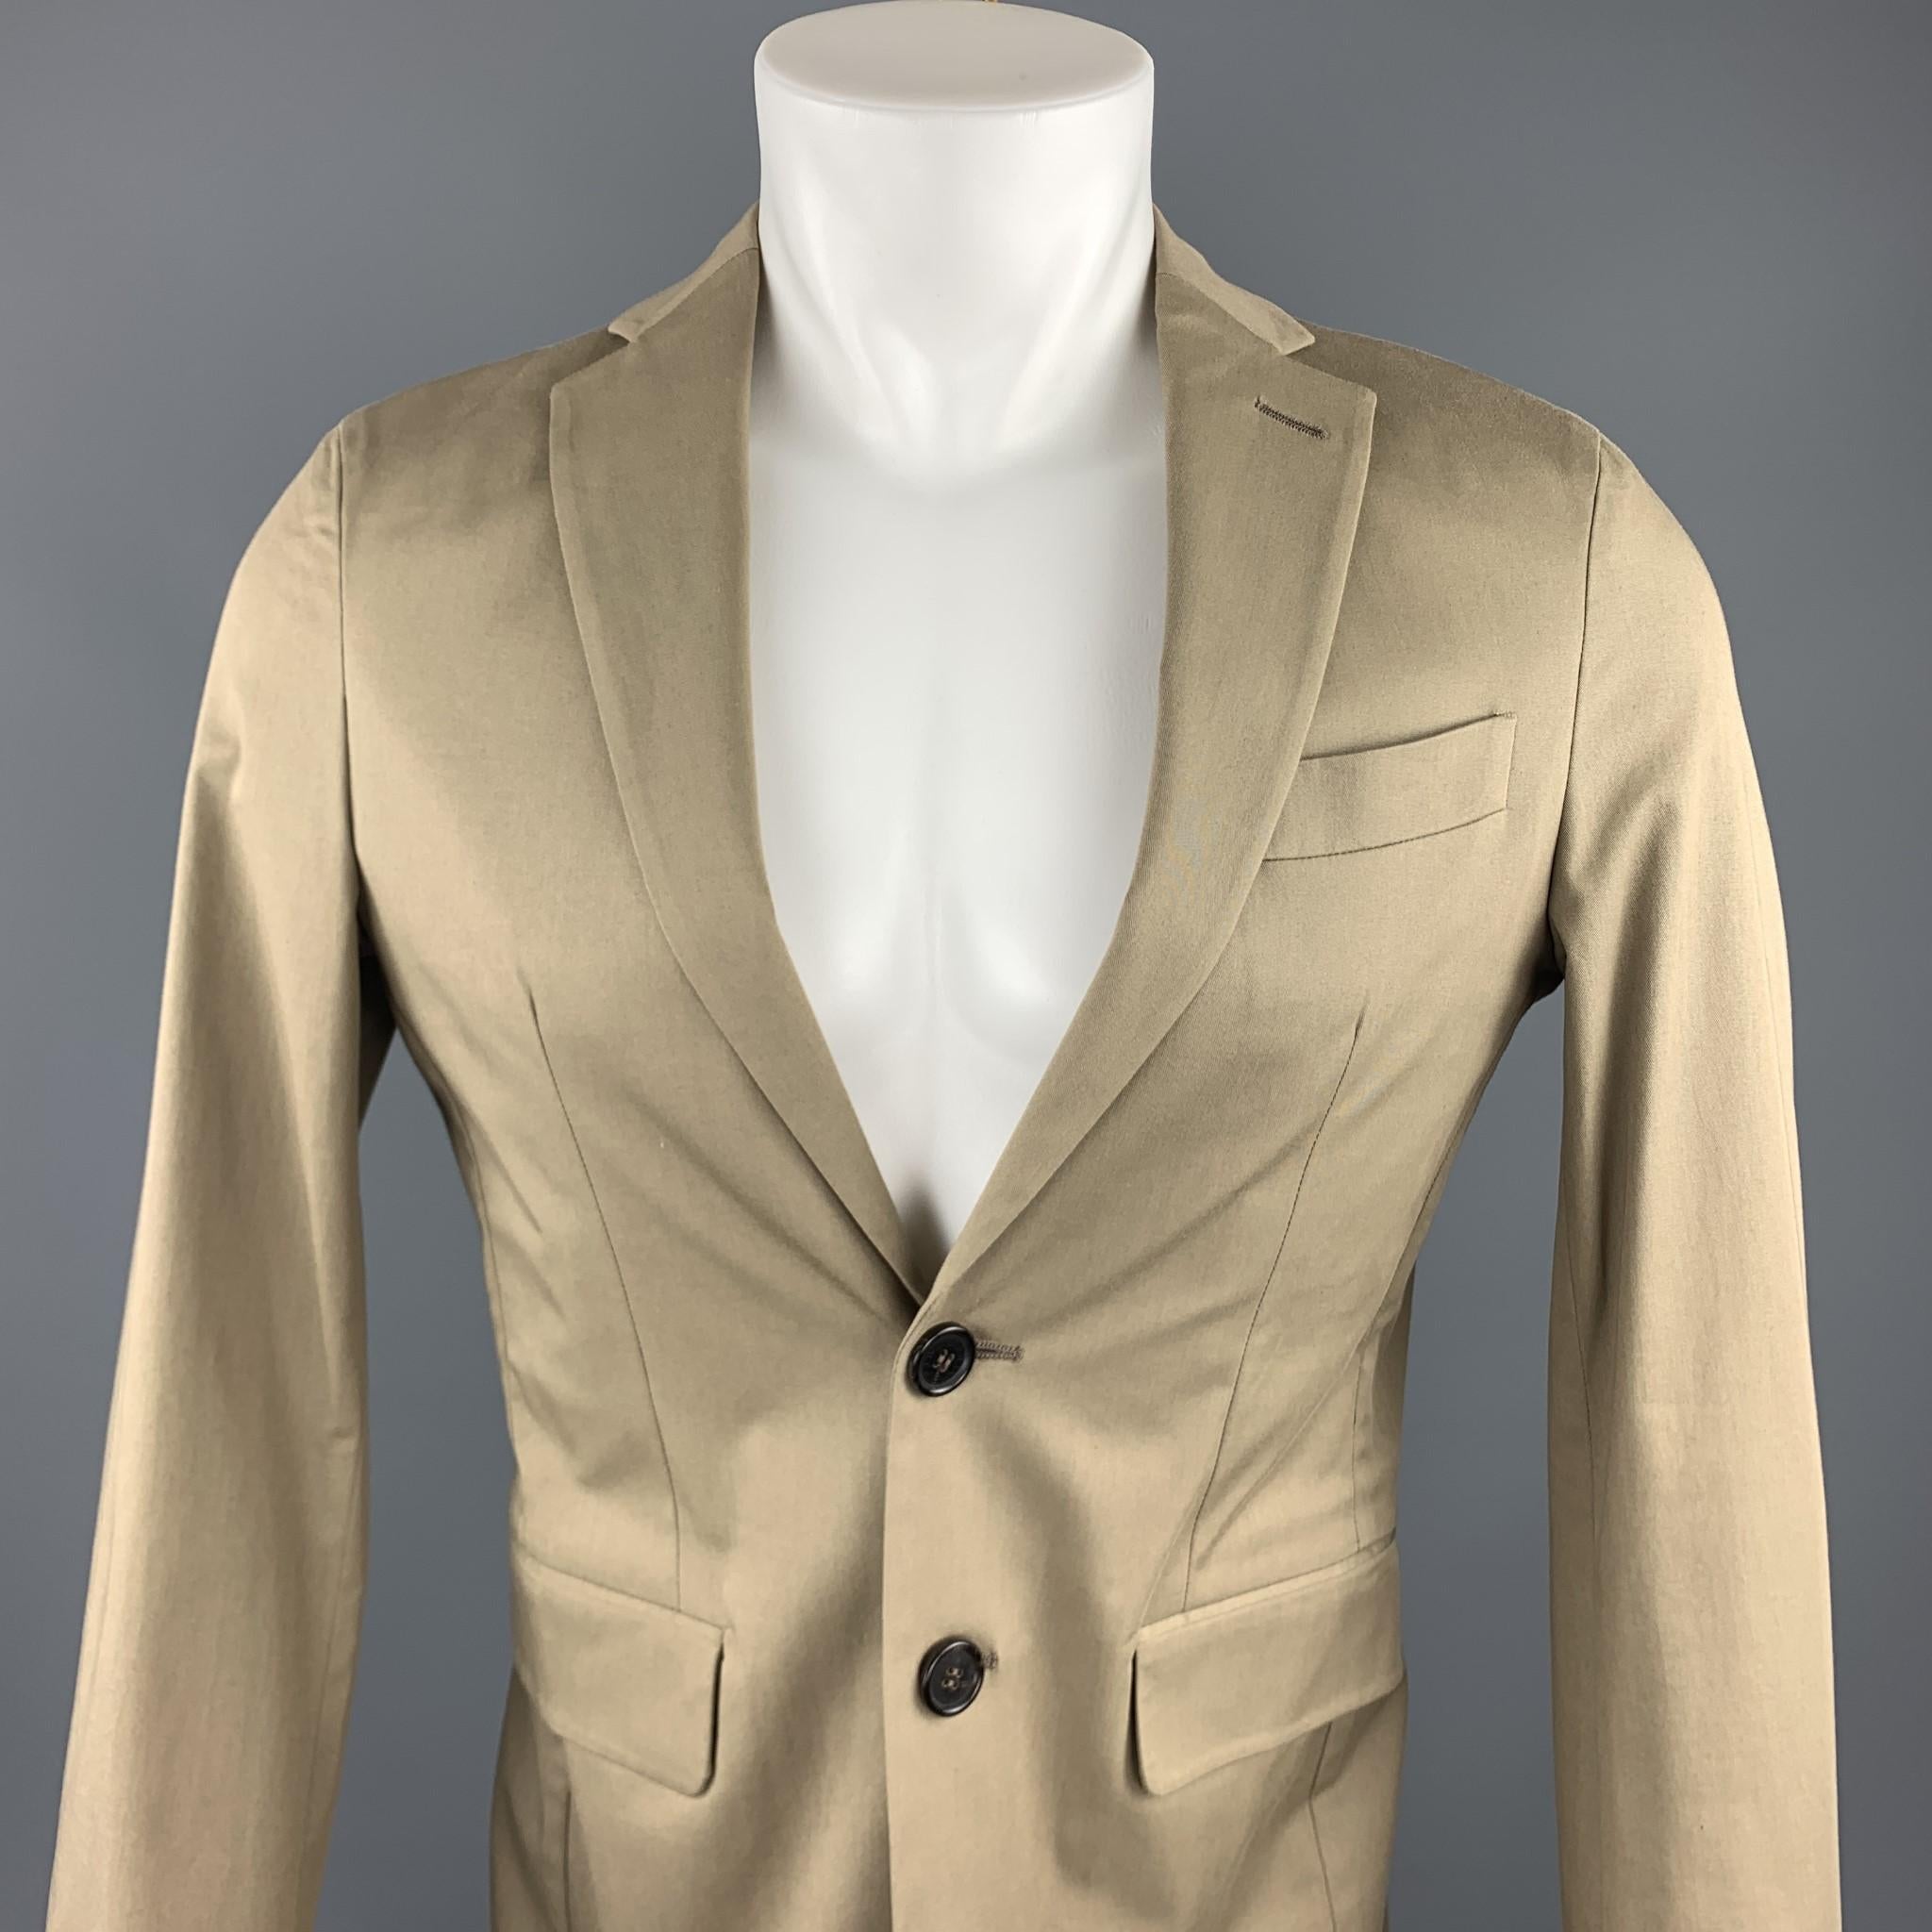 DSQUARED2 sport coat comes in a taupe cotton blend featuring a notch lapel style, flap pockets, and a two button closure. Made in Italy.

Excellent Pre-Owned Condition.
Marked: IT 46

Measurements:

Shoulder: 17 in. 
Chest: 38 in. 
Sleeve: 25 in.